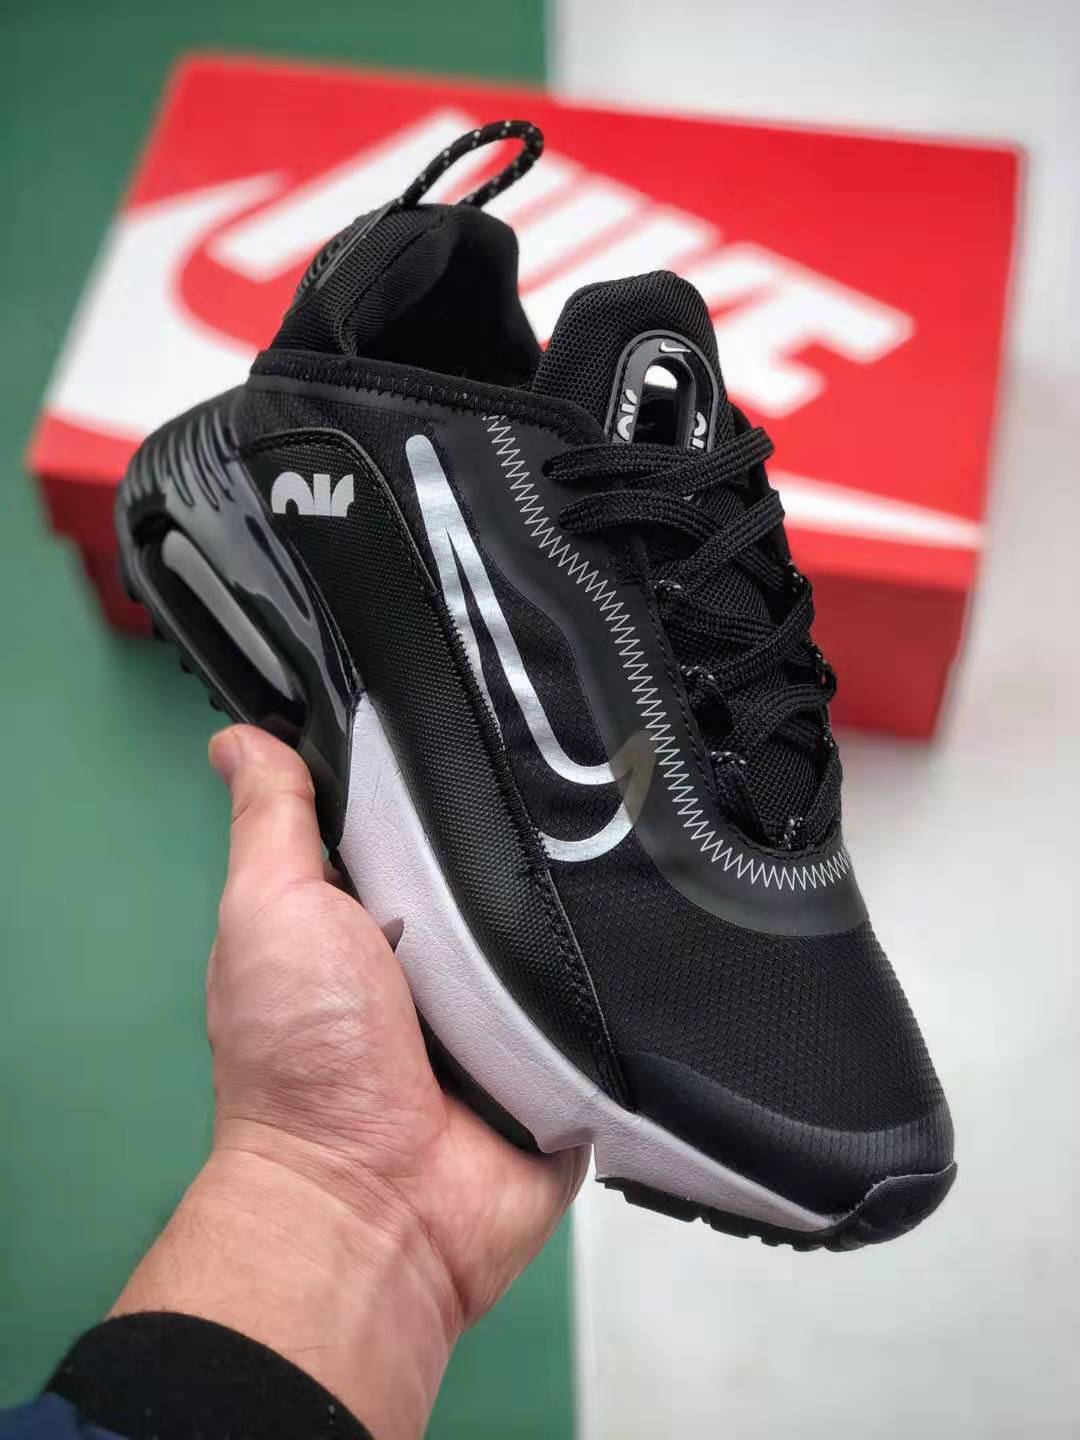 Nike Air Max 2090 Black White CT7698-004 - Stylish and Comfortable Sneakers